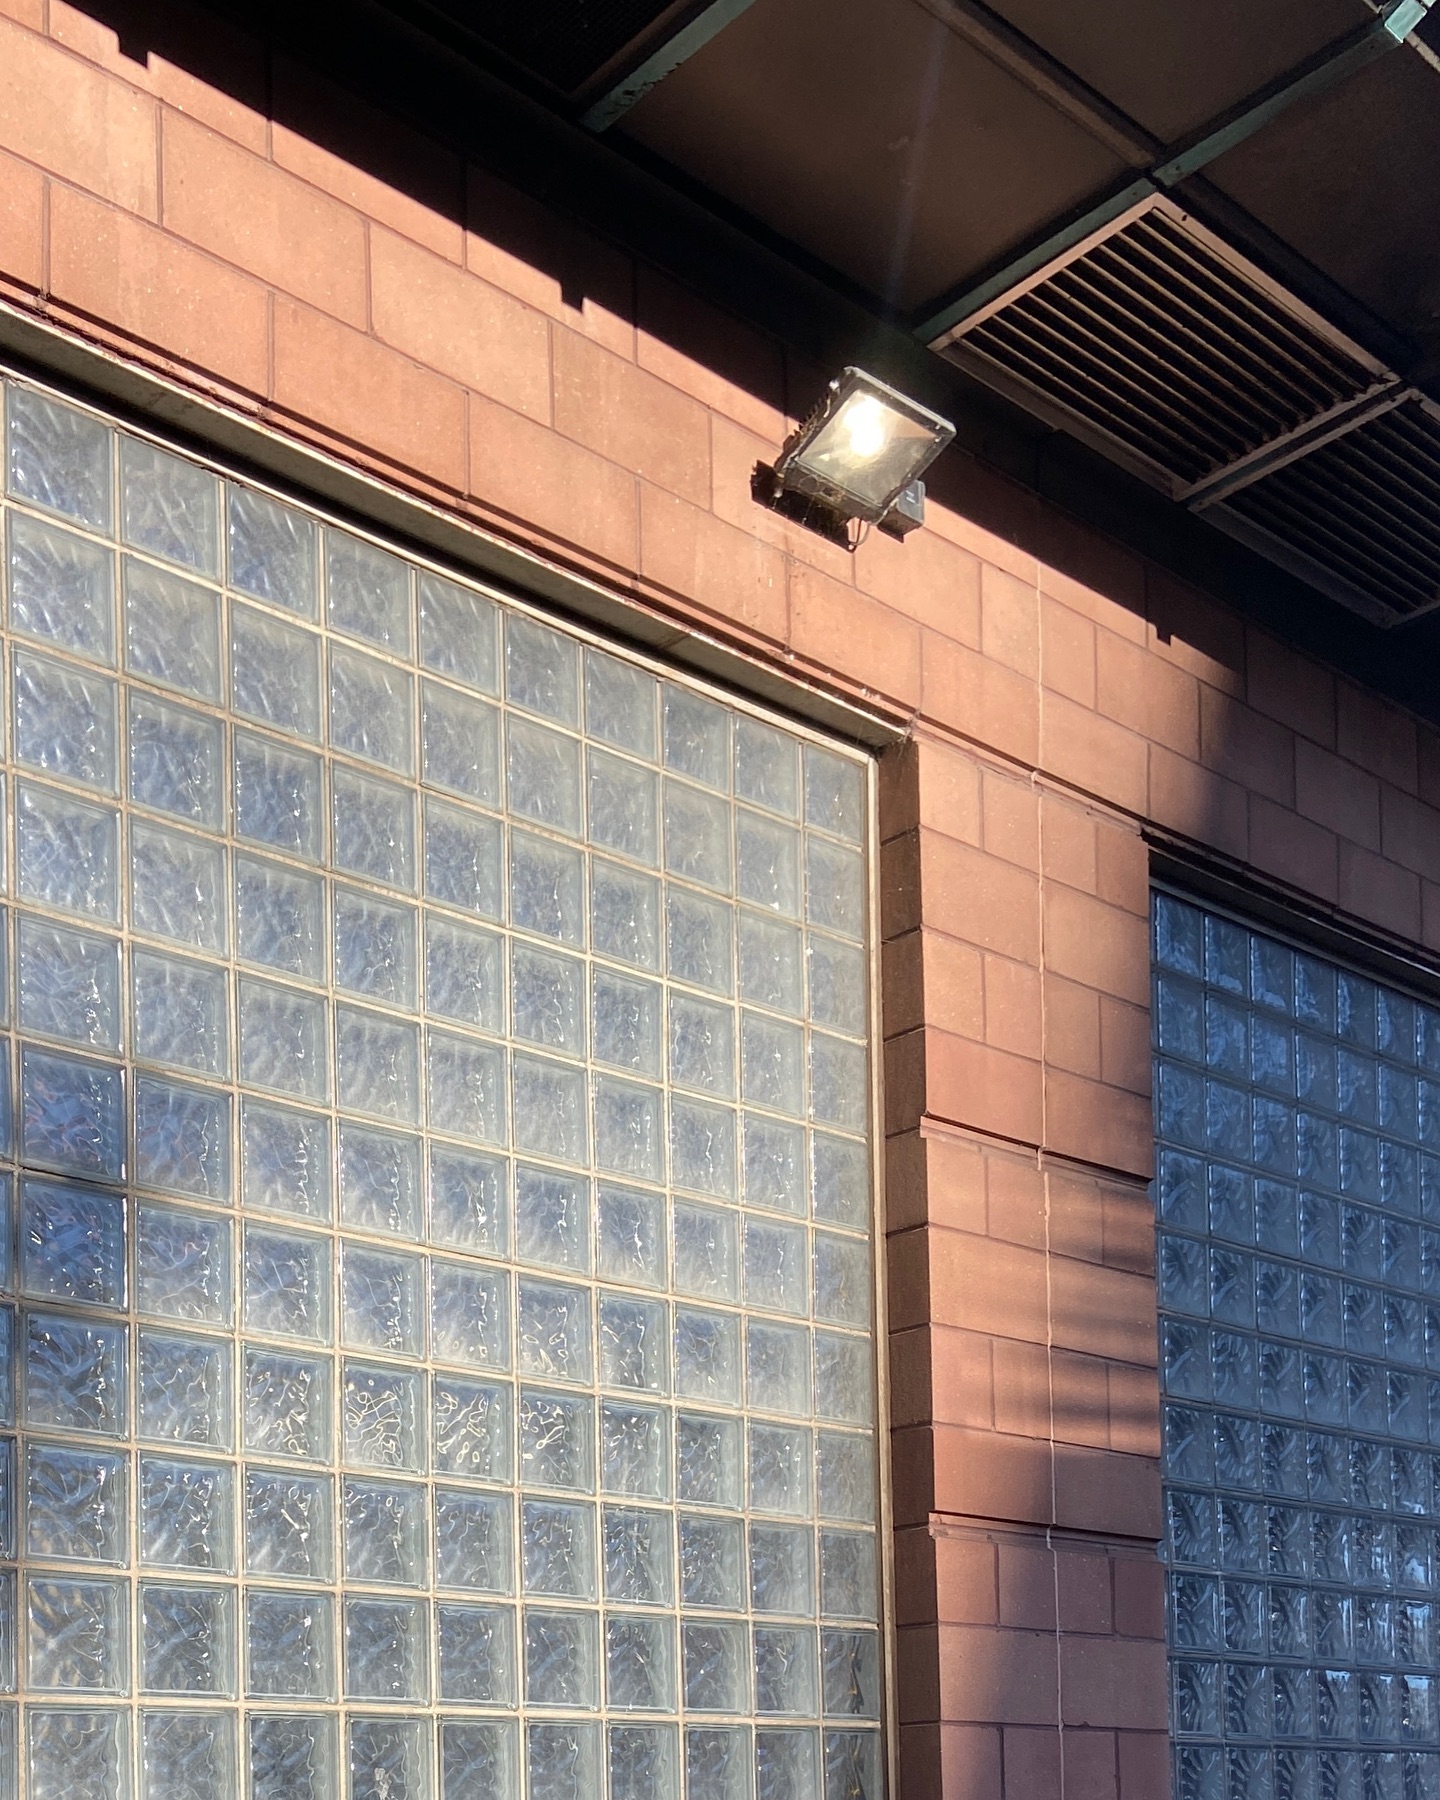 light pink brick with glass brick window. sunlight and soft shadows glinting off floodlight above. grate in ceiling